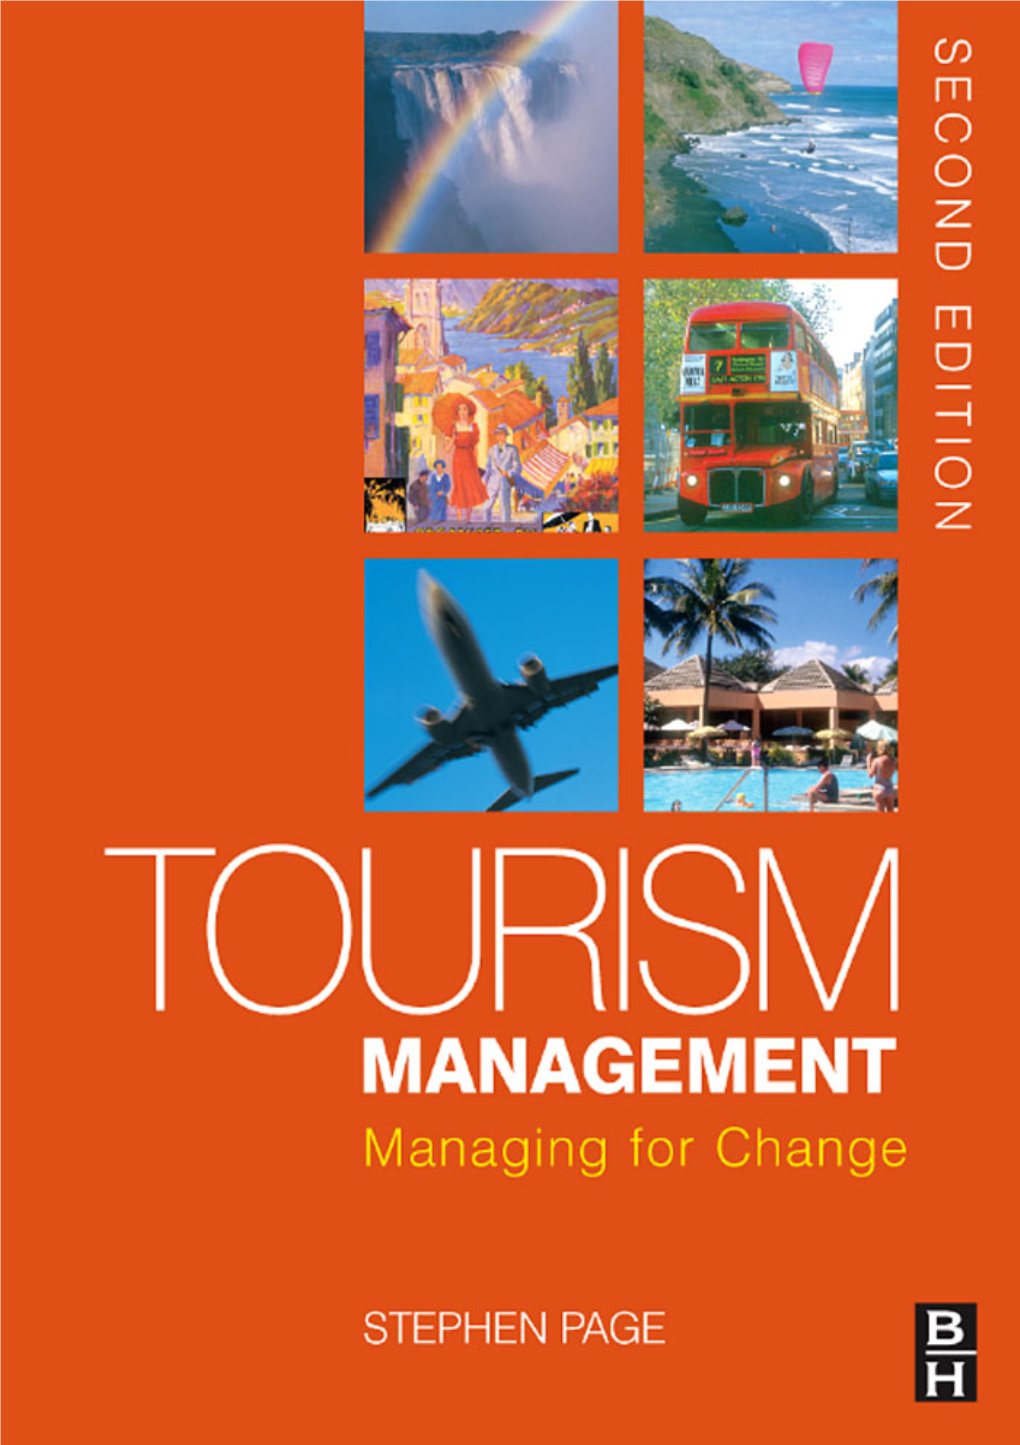 TOURISM MANAGEMENT: Managing for Change, Second Edition